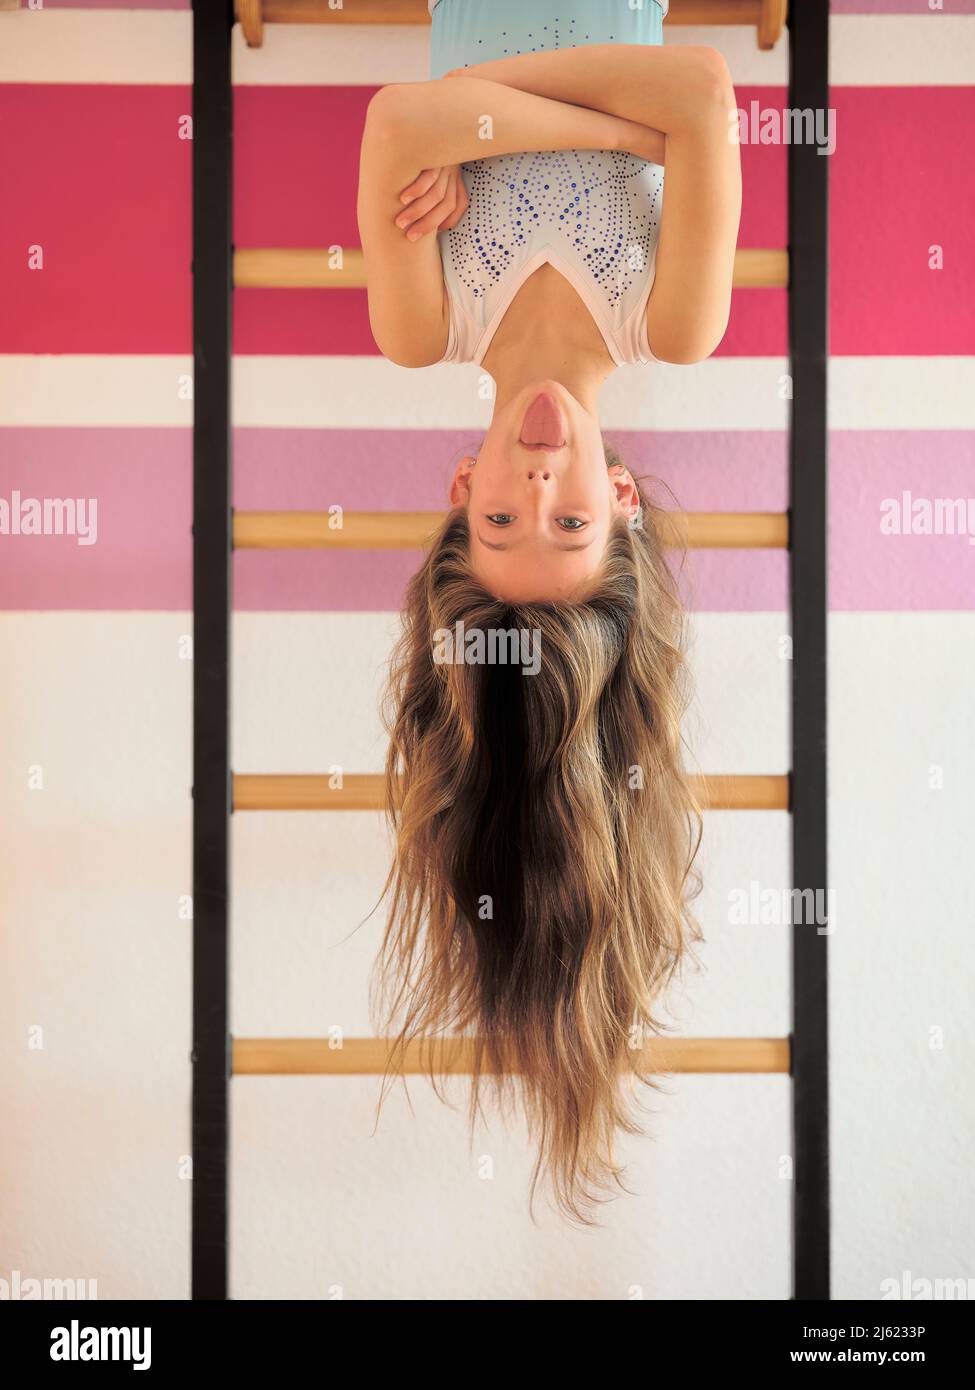 Girl sticking out tongue hanging upside down on wall bars Stock Photo